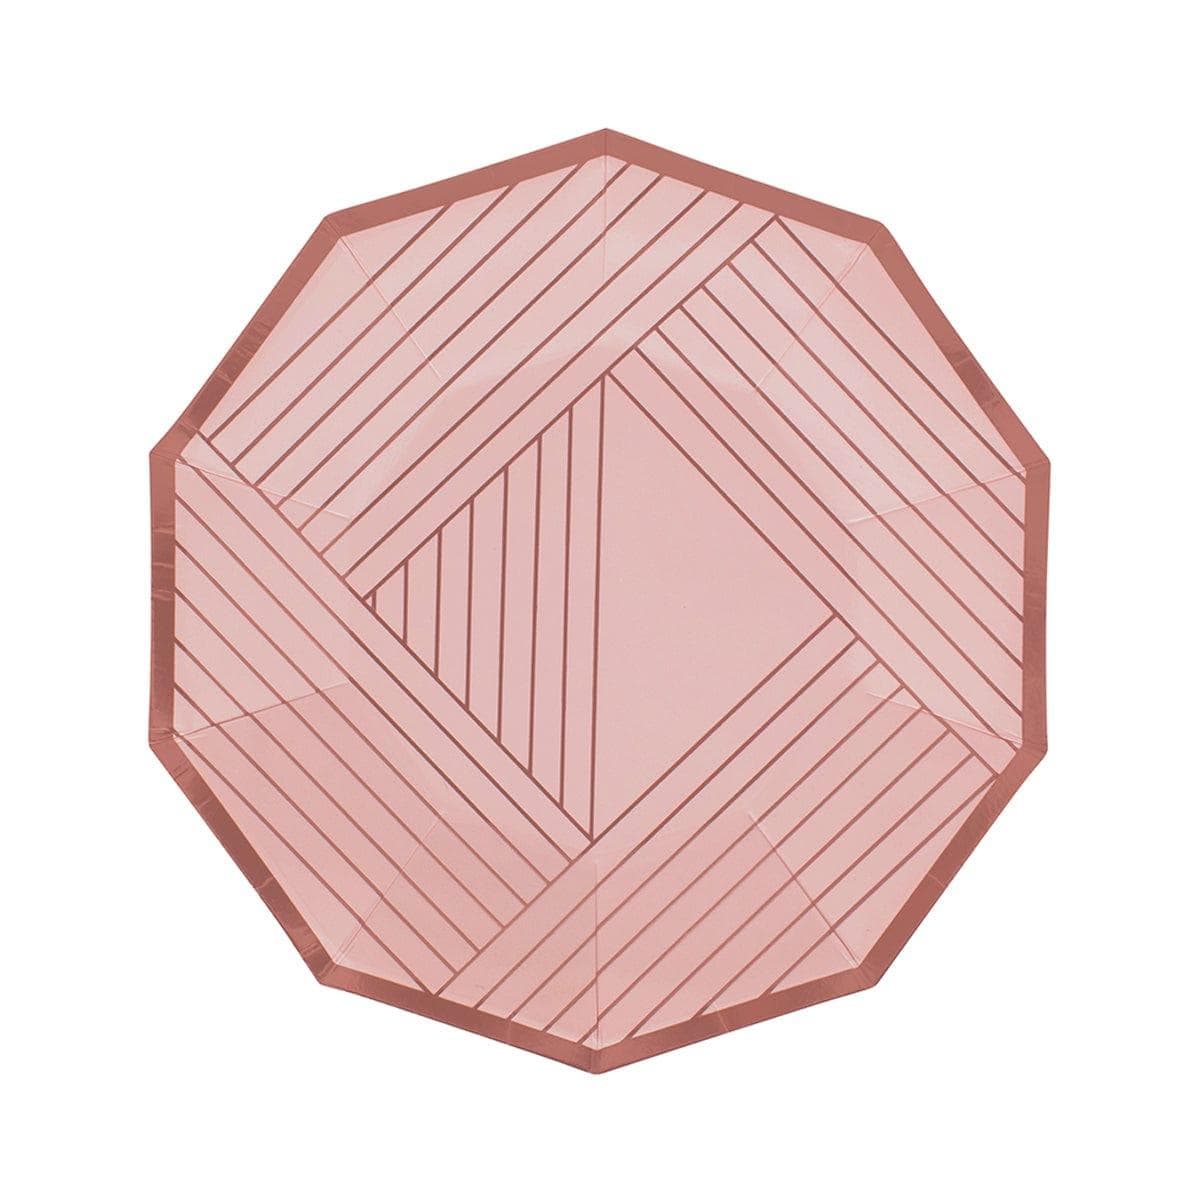 YIWU SANDY PAPER PRODUCTS CO., LTD Everyday Entertaining Hexagone Marble Rose Gold Plates, 7 Inches, 8 Count